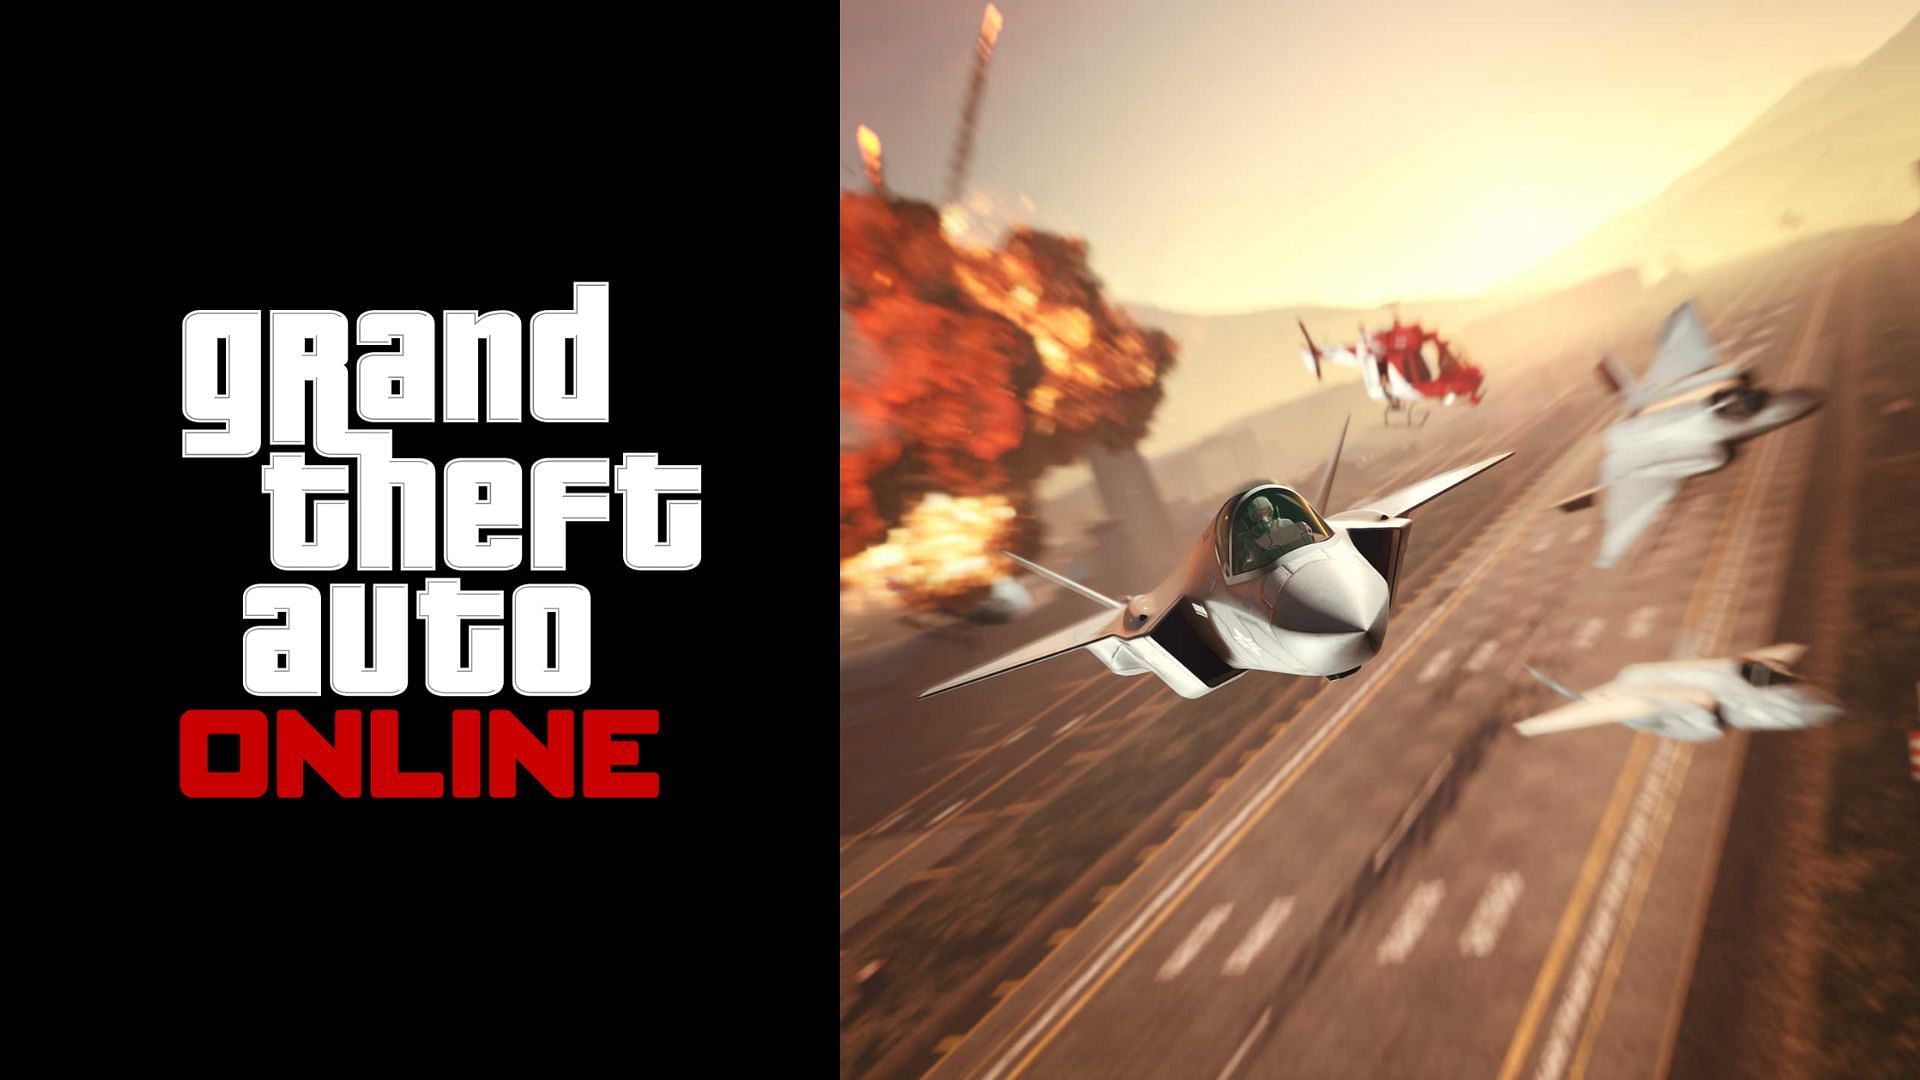 GRAND THEFT AUTO SAN ANDREAS ONLINE! 